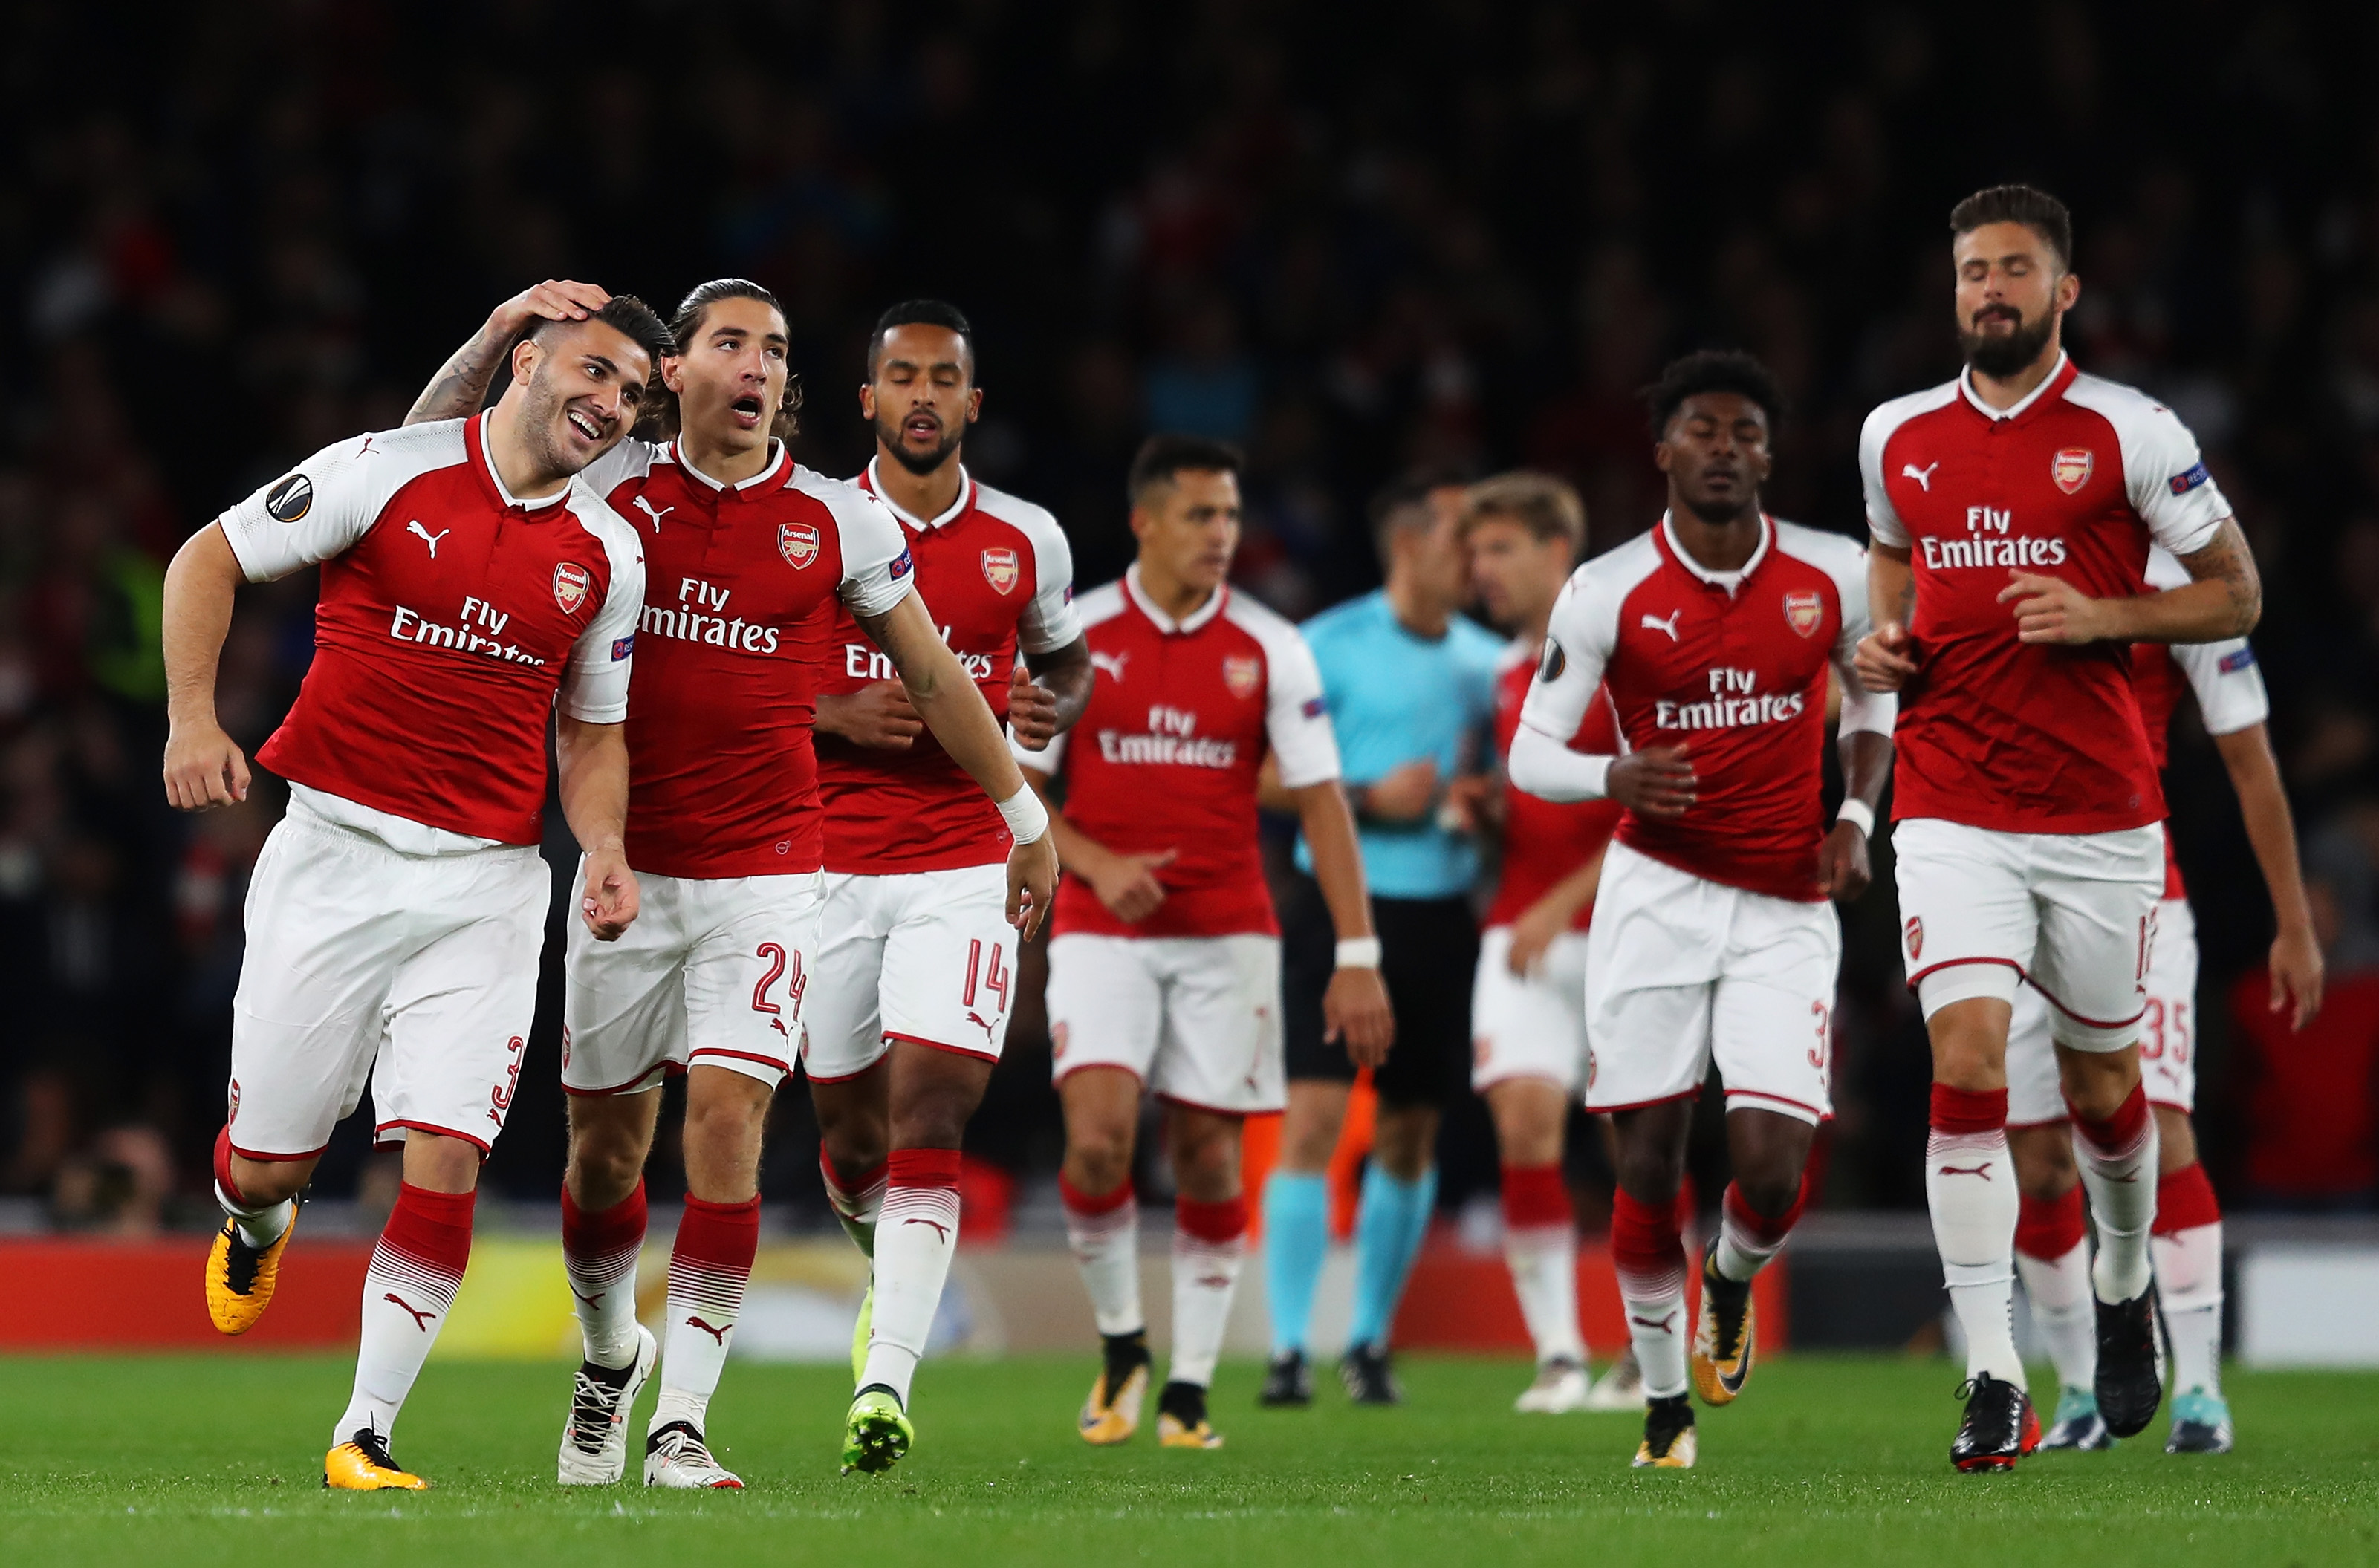 LONDON, ENGLAND - SEPTEMBER 14:  Sead Kolasinac of Arsenal celebrates scoring the first Arsenal goal with team mates during the UEFA Europa League group H match between Arsenal FC and 1. FC Koeln at Emirates Stadium on September 14, 2017 in London, United Kingdom.  (Photo by Richard Heathcote/Getty Images)